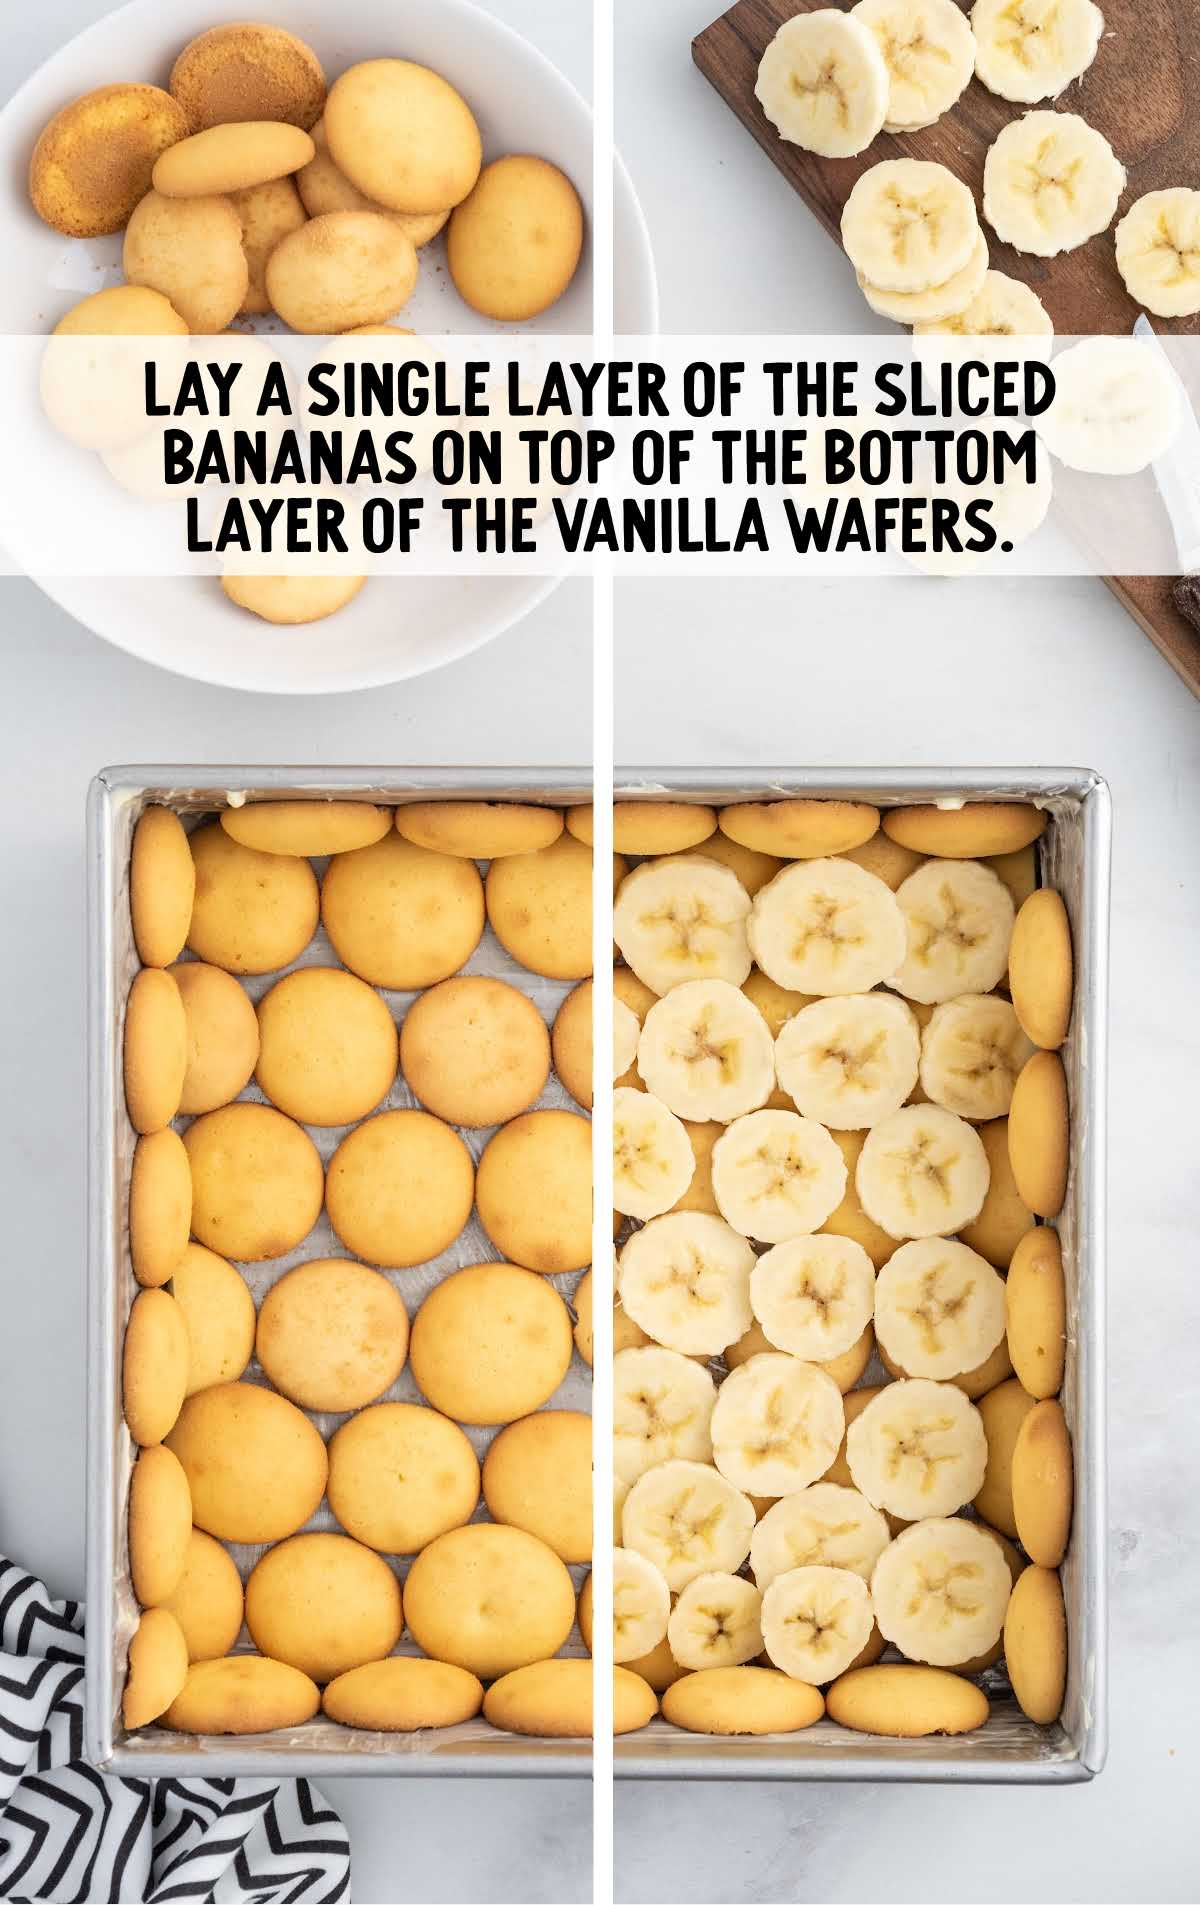 banana slices laid on top of the bottom layer of vanilla wafers